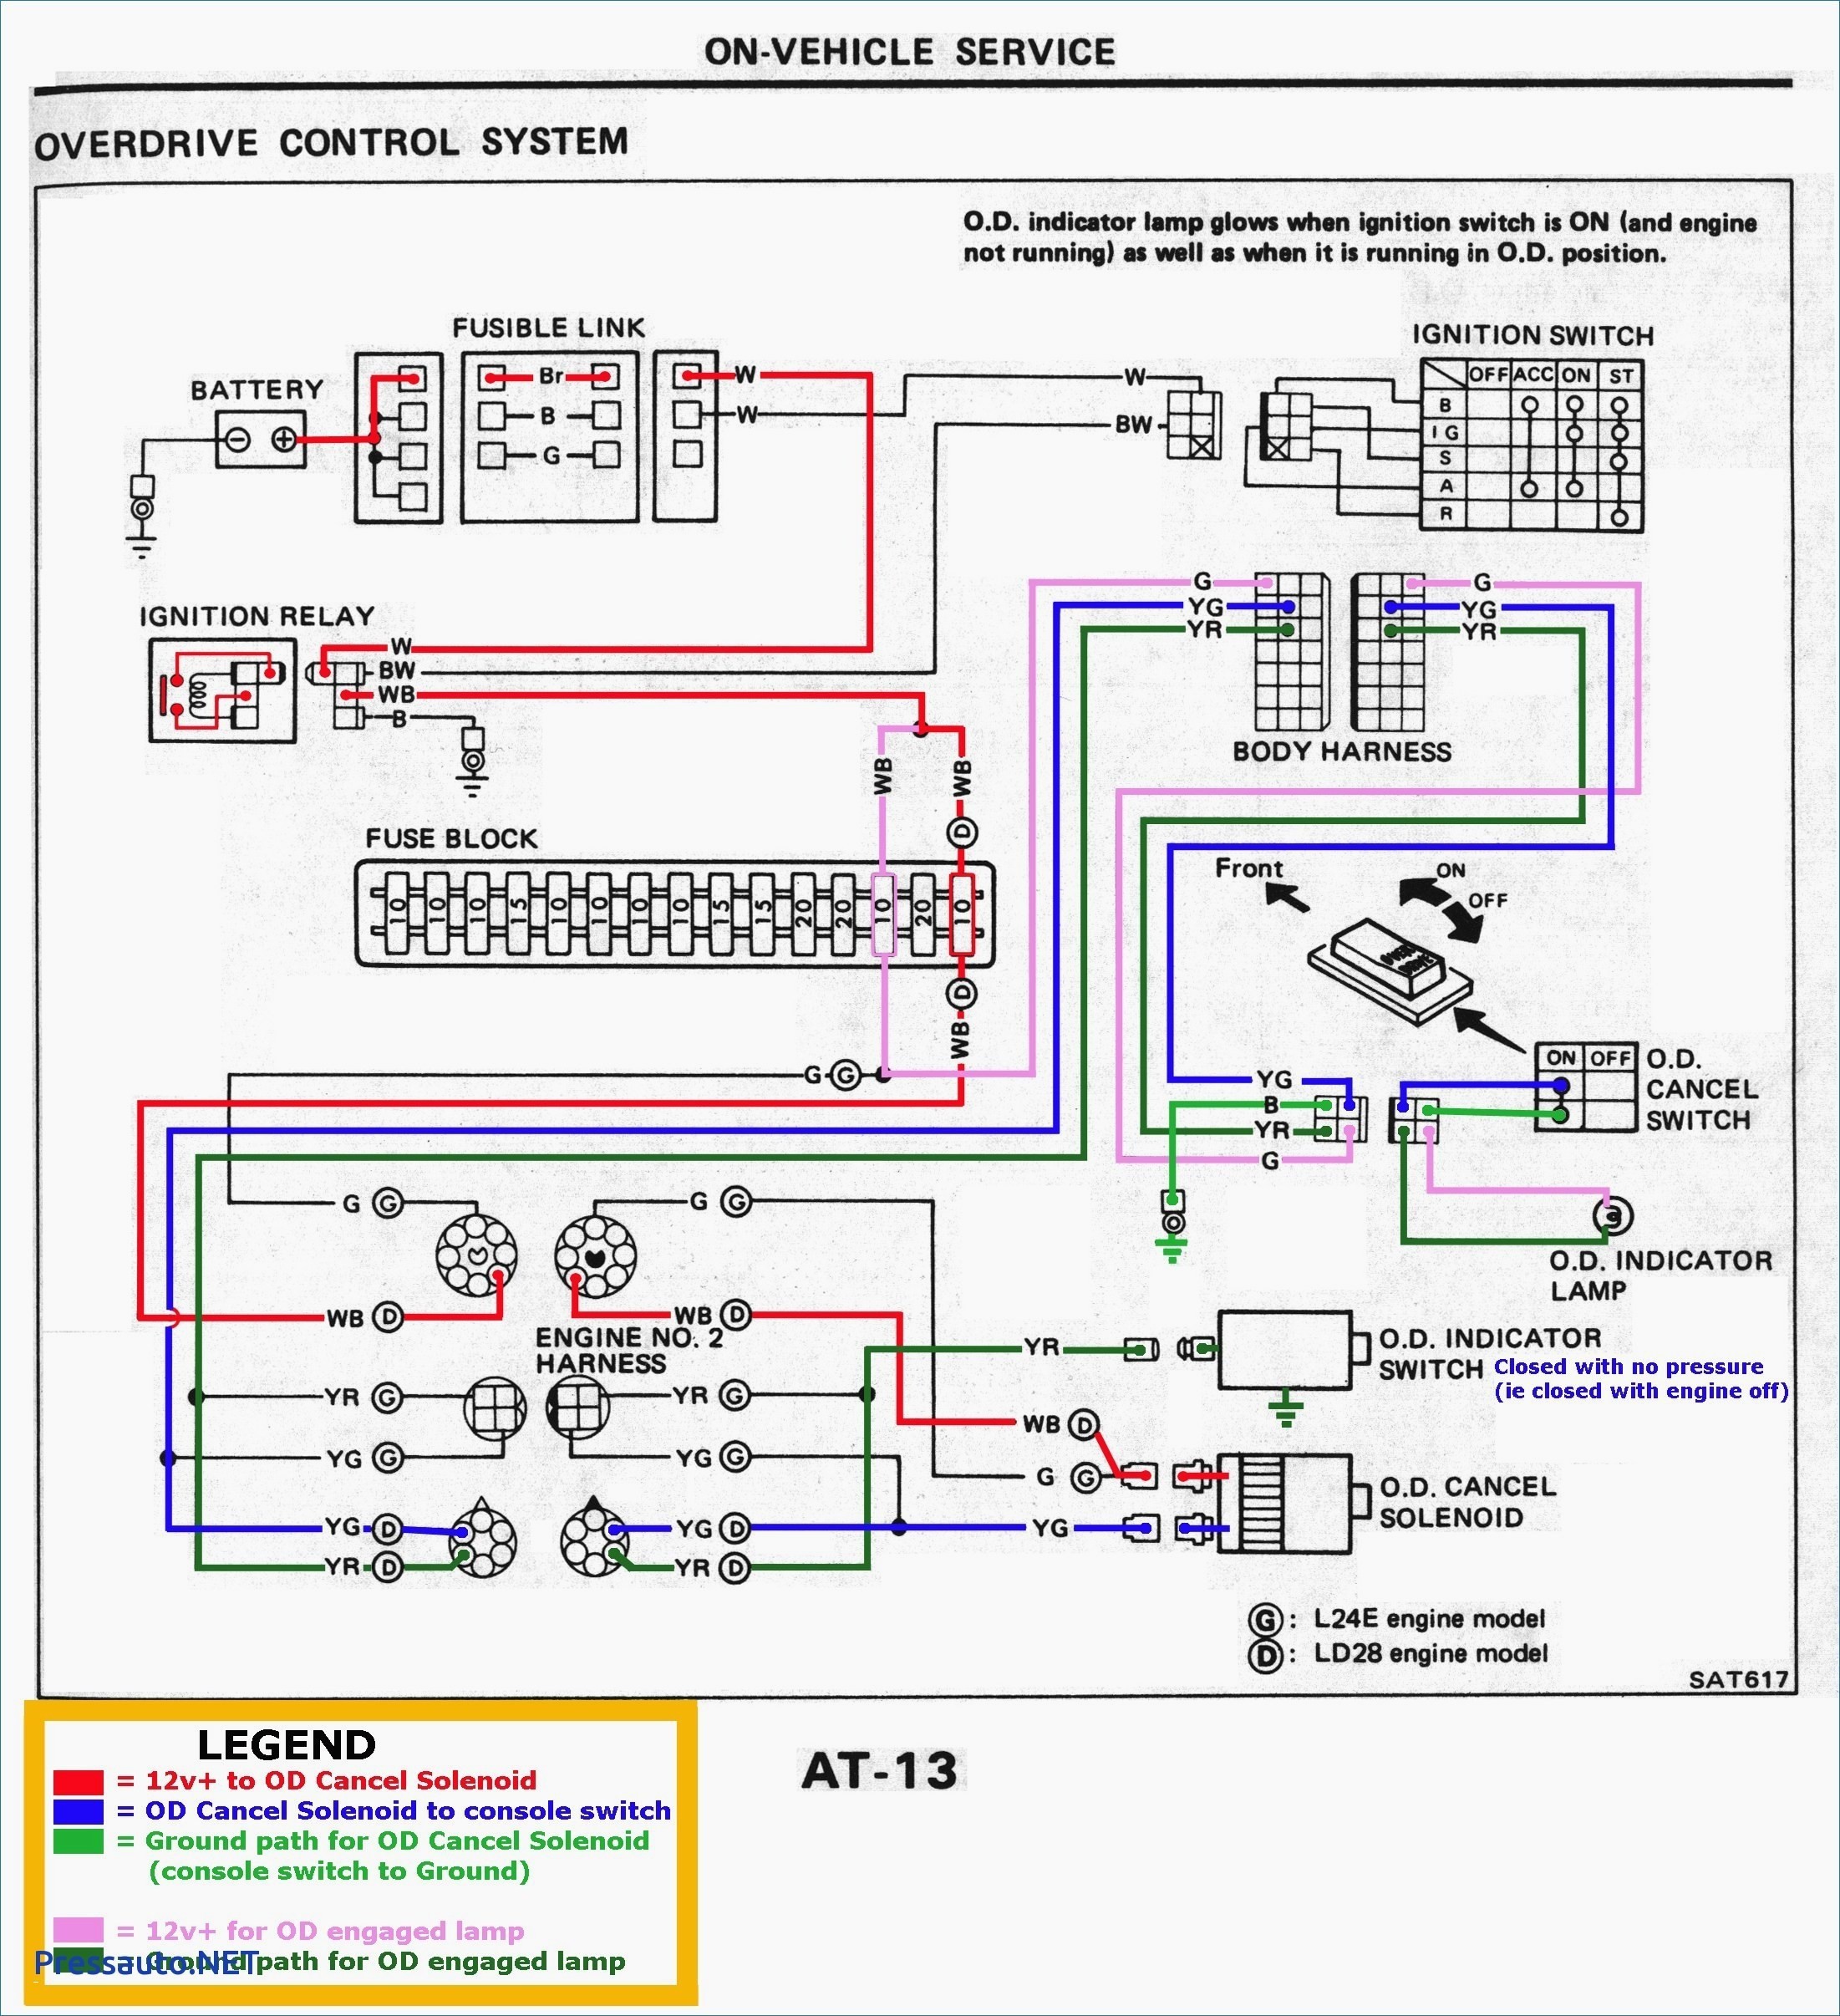 wiring diagram xr200 simple how to wire an ignition switch diagram dmp xr200 wiring diagram xr200